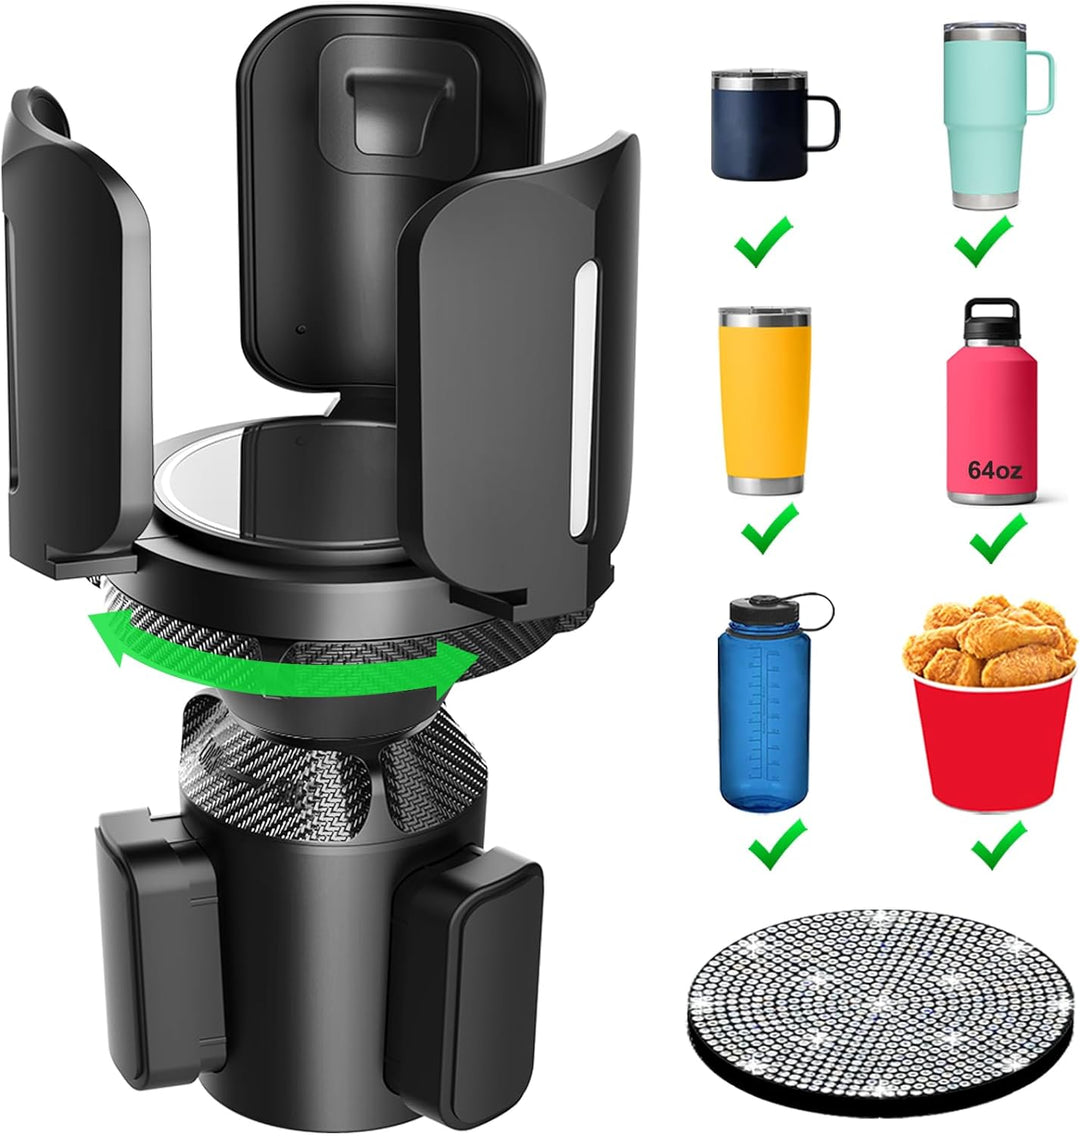 Upgraded 64Oz Large Cup Holder Expander with Coaster for Car, Expandable Cup Holder Adapter with Adjustable Base, Universal Compatible with Yeti, Hydro Flasks, Camelbak, Other Big Bottles Mugs Drinks